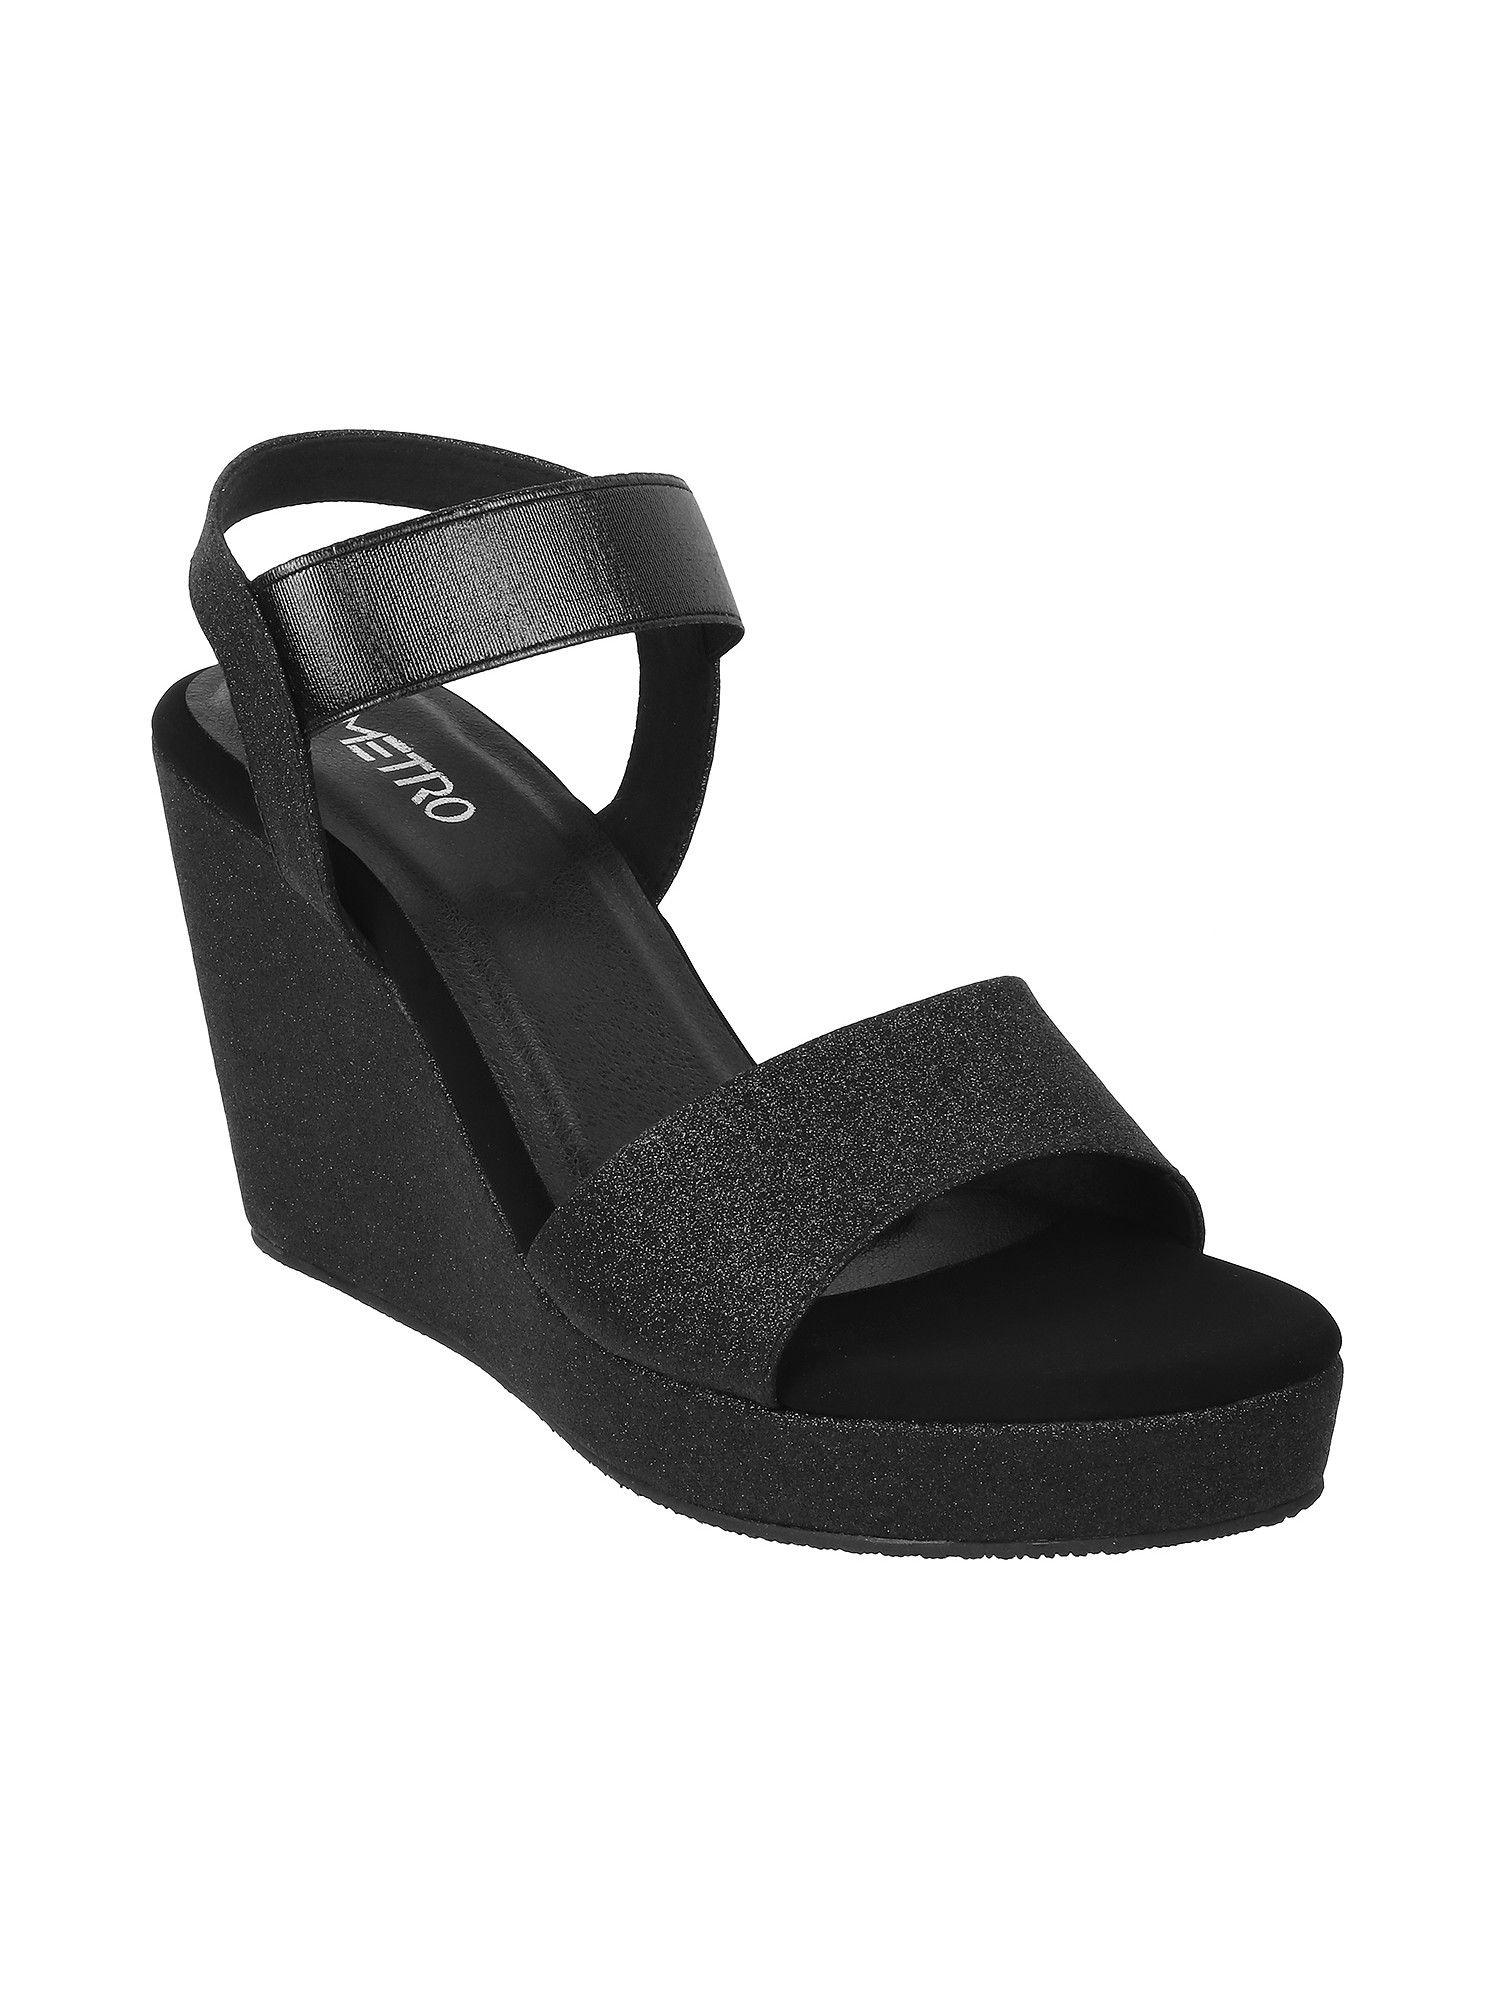 Black Synthetic Embellished/sequined Women Wedges